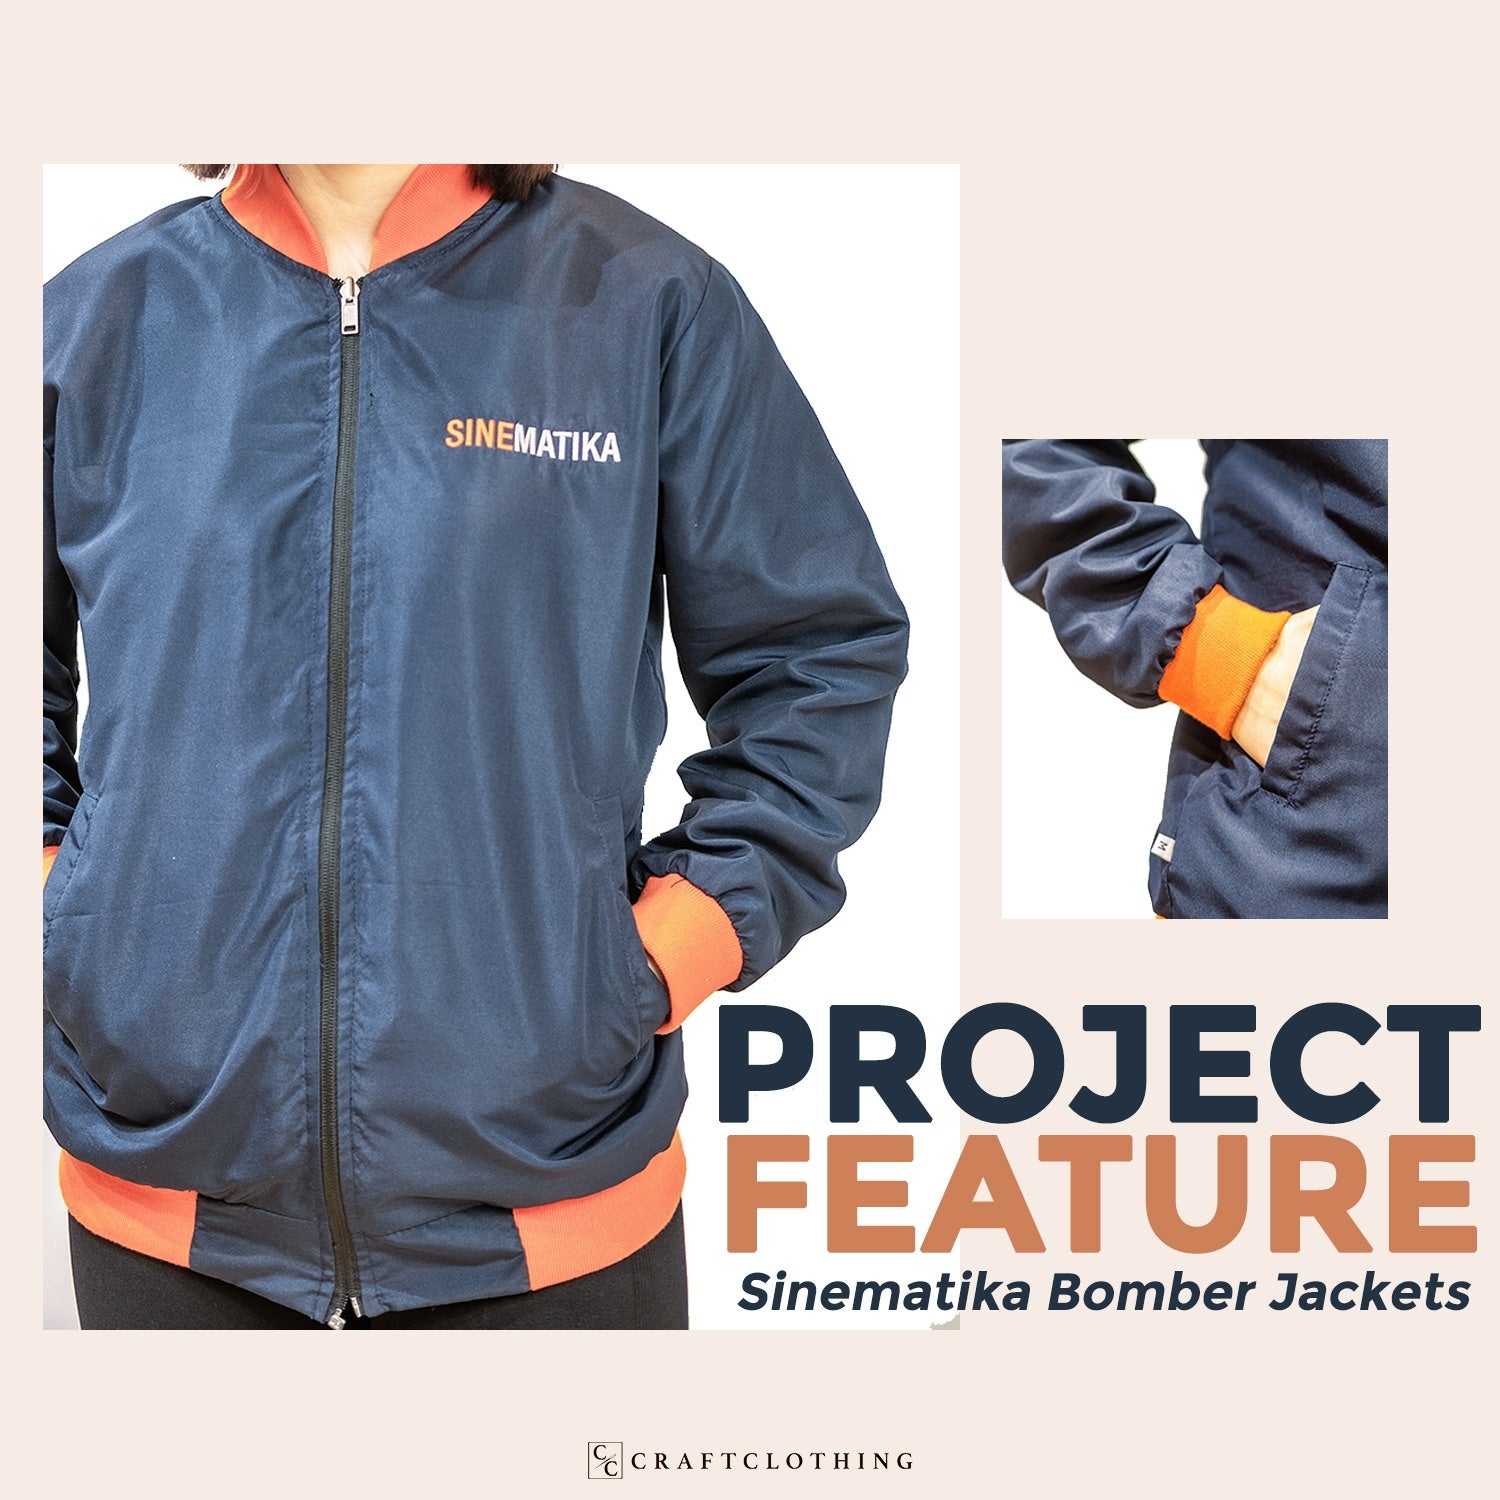 PROJECT FEATURE: Sinematika Bomber Jackets